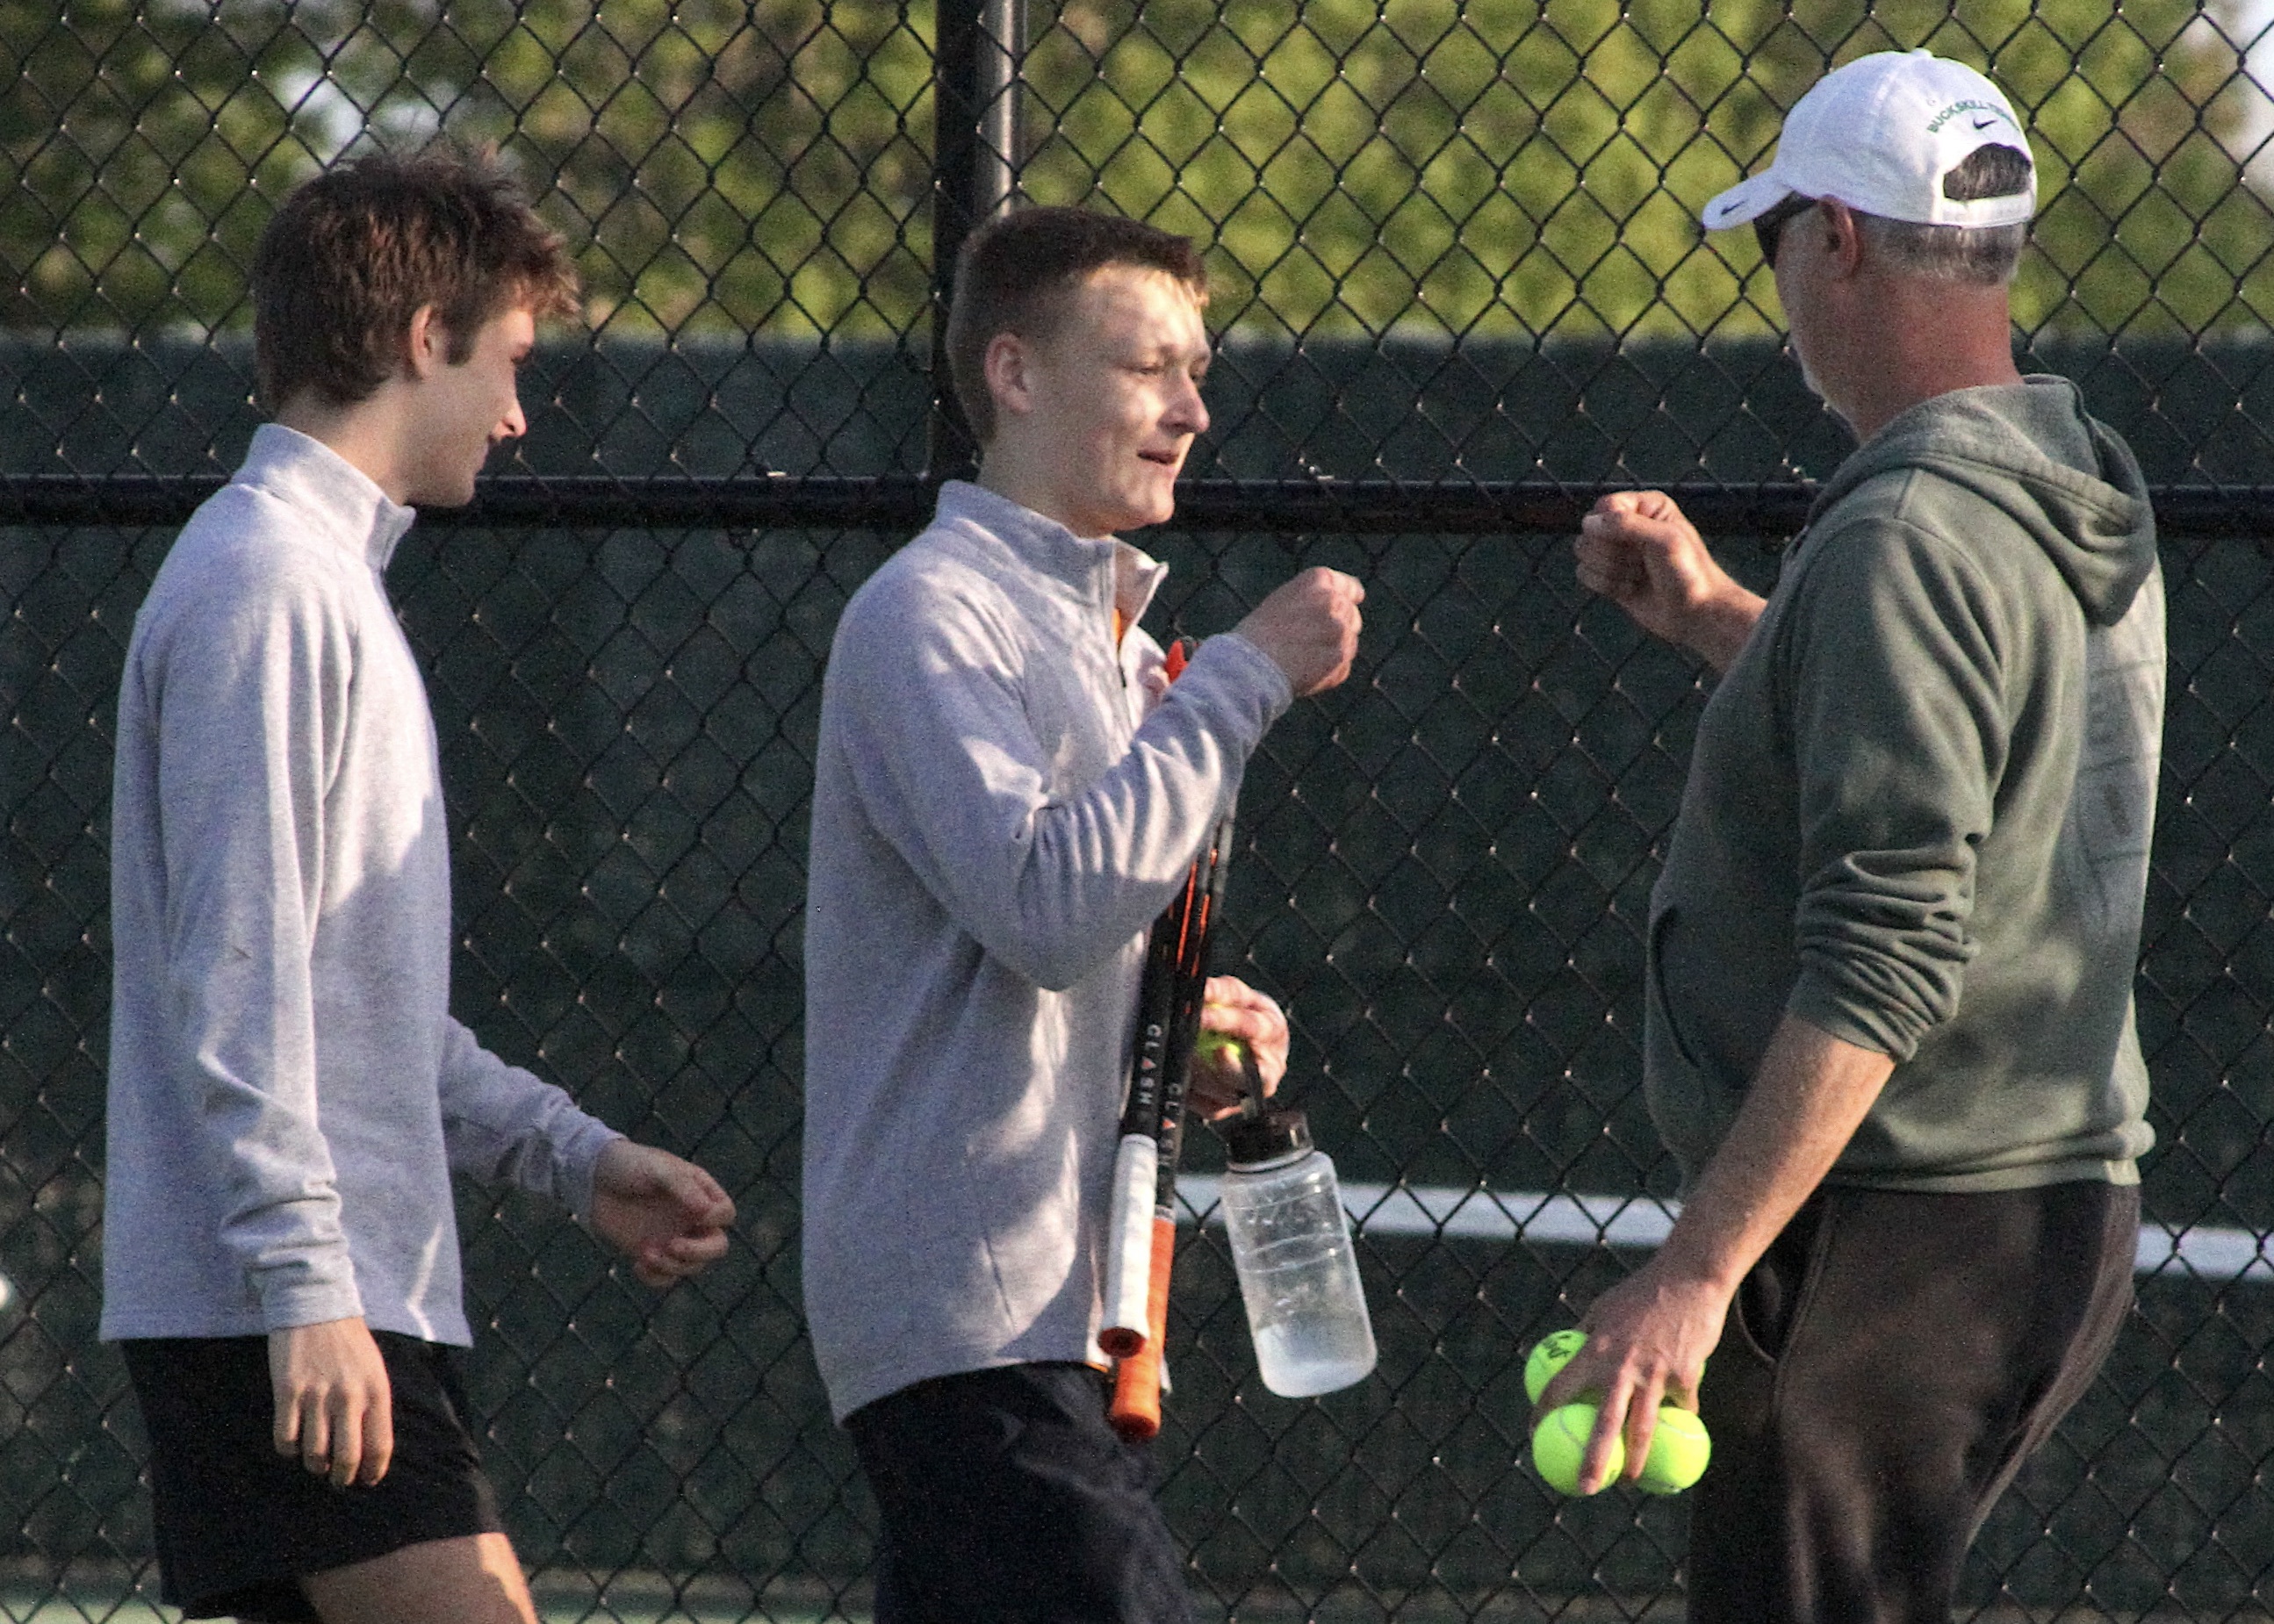 East Hampton sophomore Kiefer Mitchell is congratulated by senior captain Max Astilean and head coach Kevin McConville following his three-set win that clinched the match for the Bonackers. DESIRÉE KEEGAN